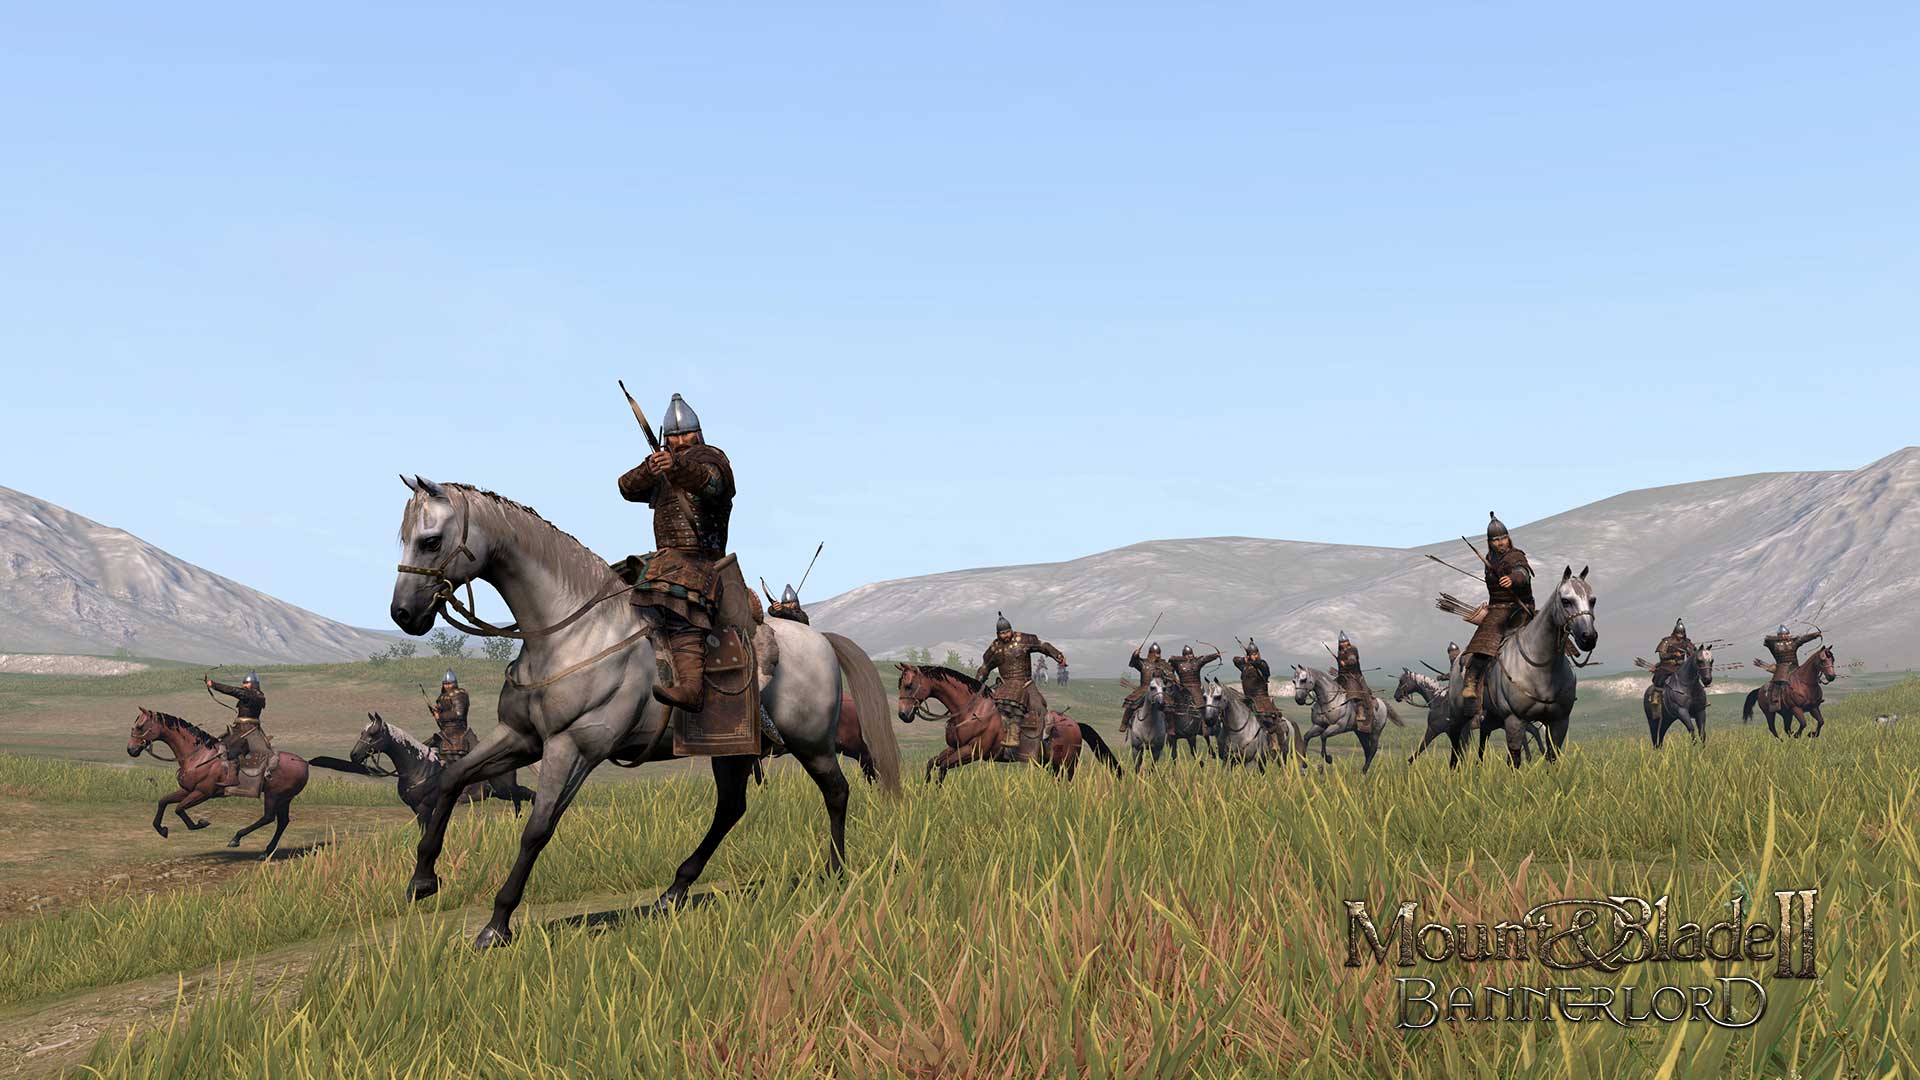 Mount and blade bannerlord караваны. Mount and Blade 2. Mount and Blade 2 Bannerlord. Mount and Blade 2 КУЗАИТЫ. Mounted Blade 2 Bannerlord.